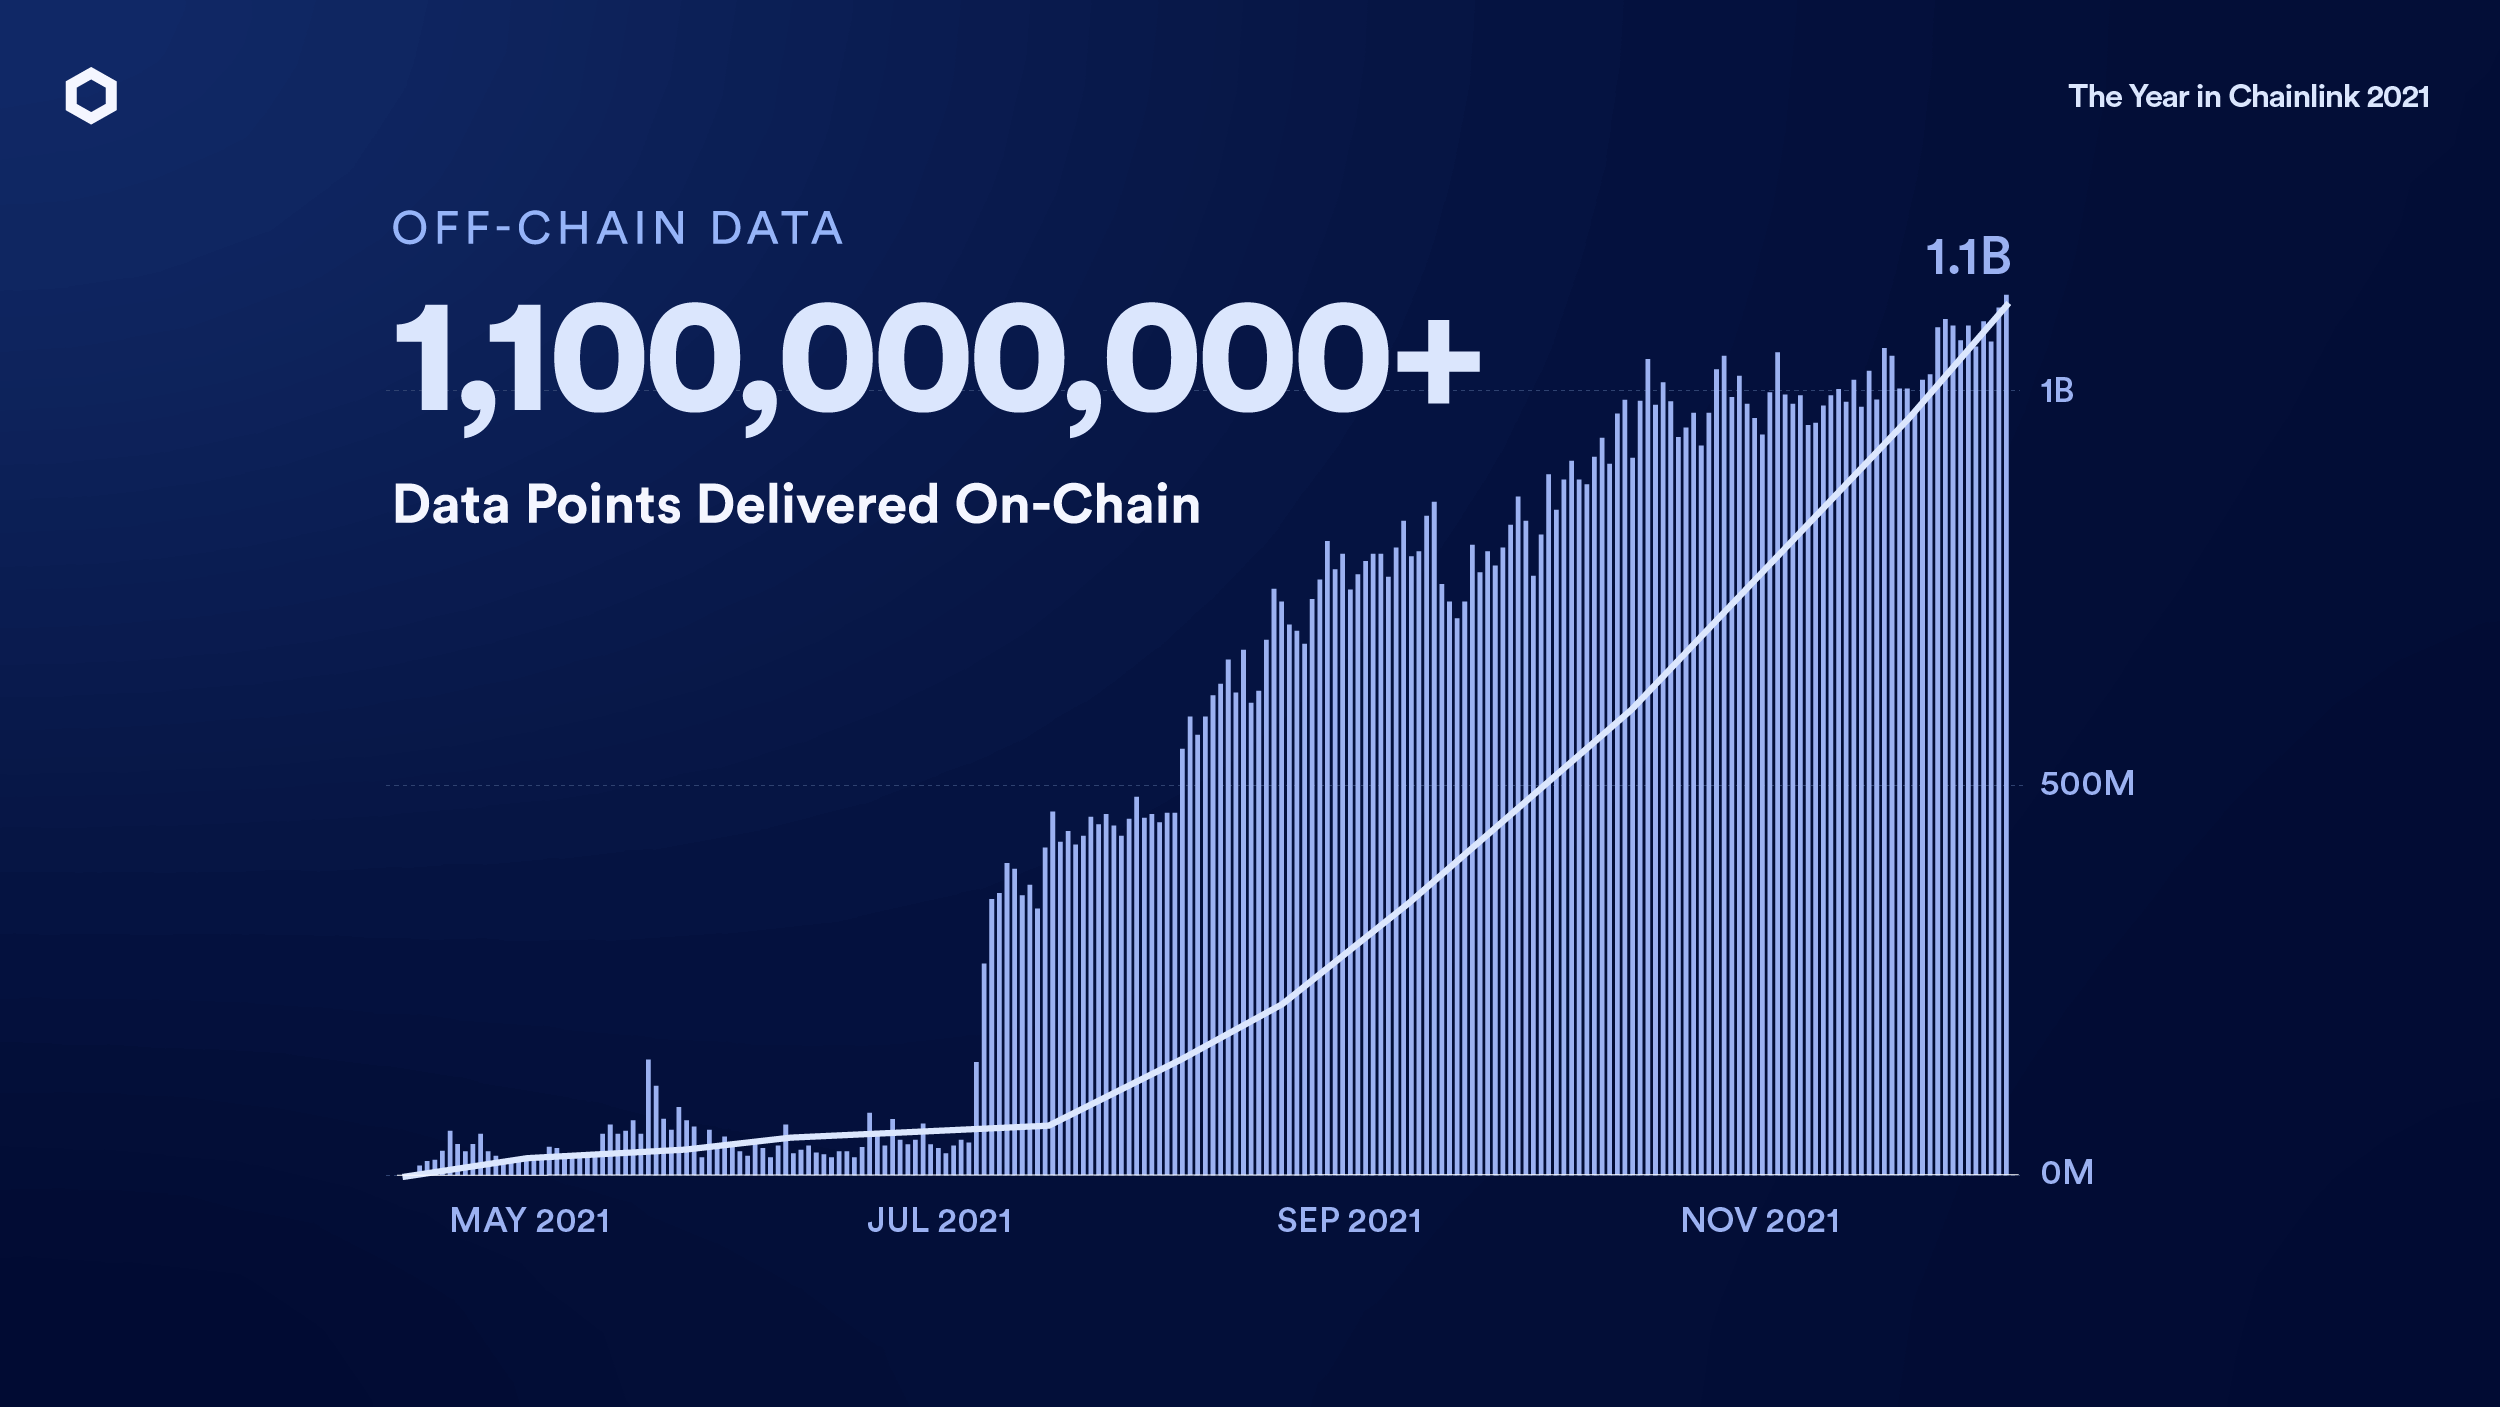 Data points delivered in chain (Chainlink)